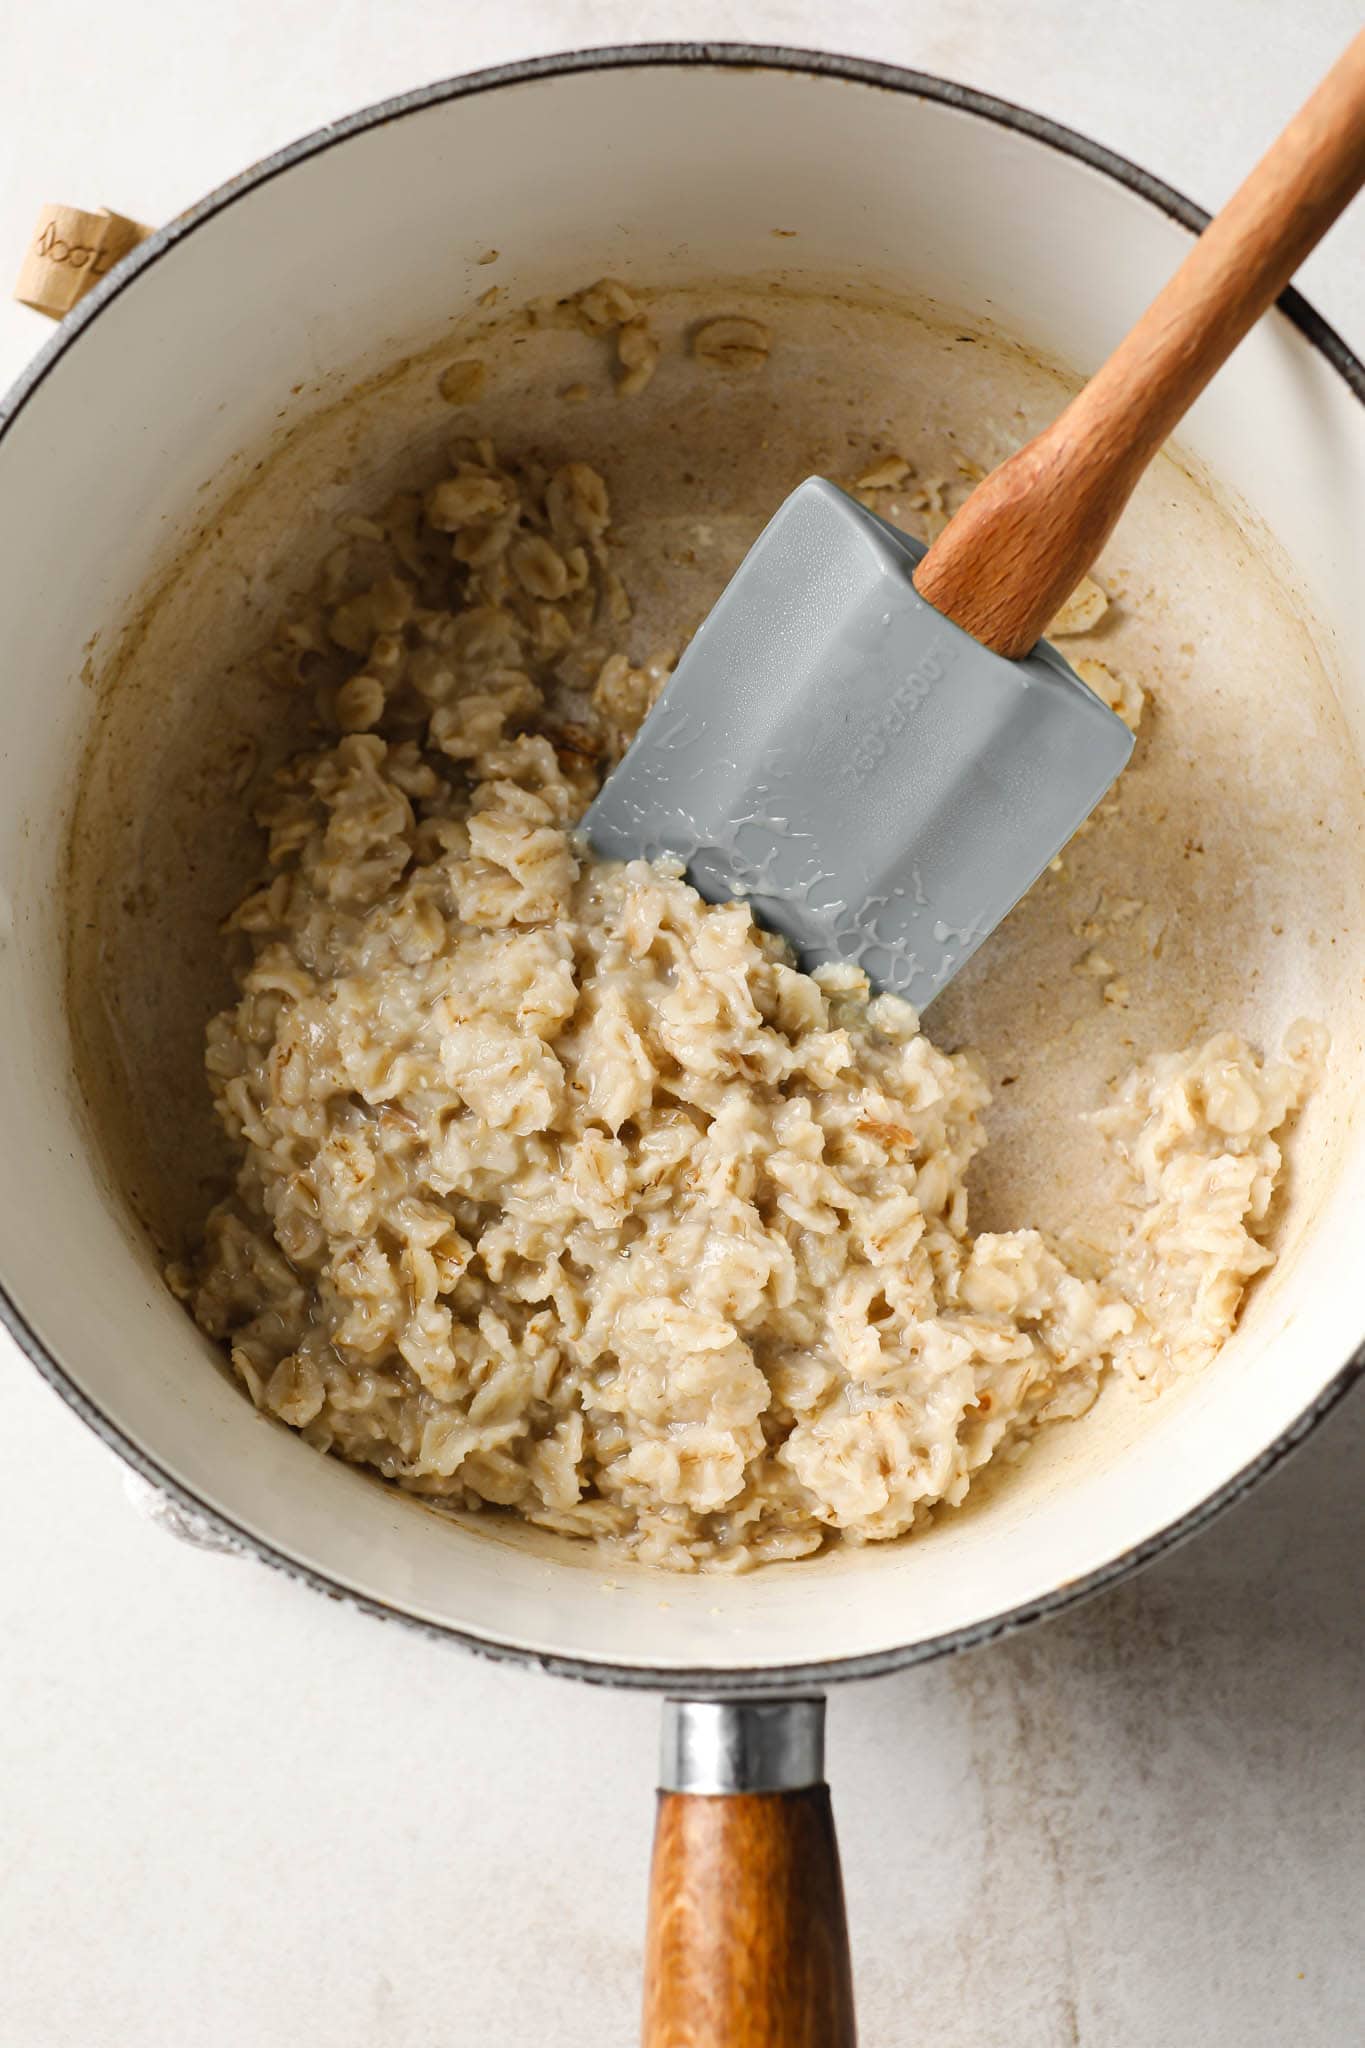 Oatmeal cooked down in a white saucepan